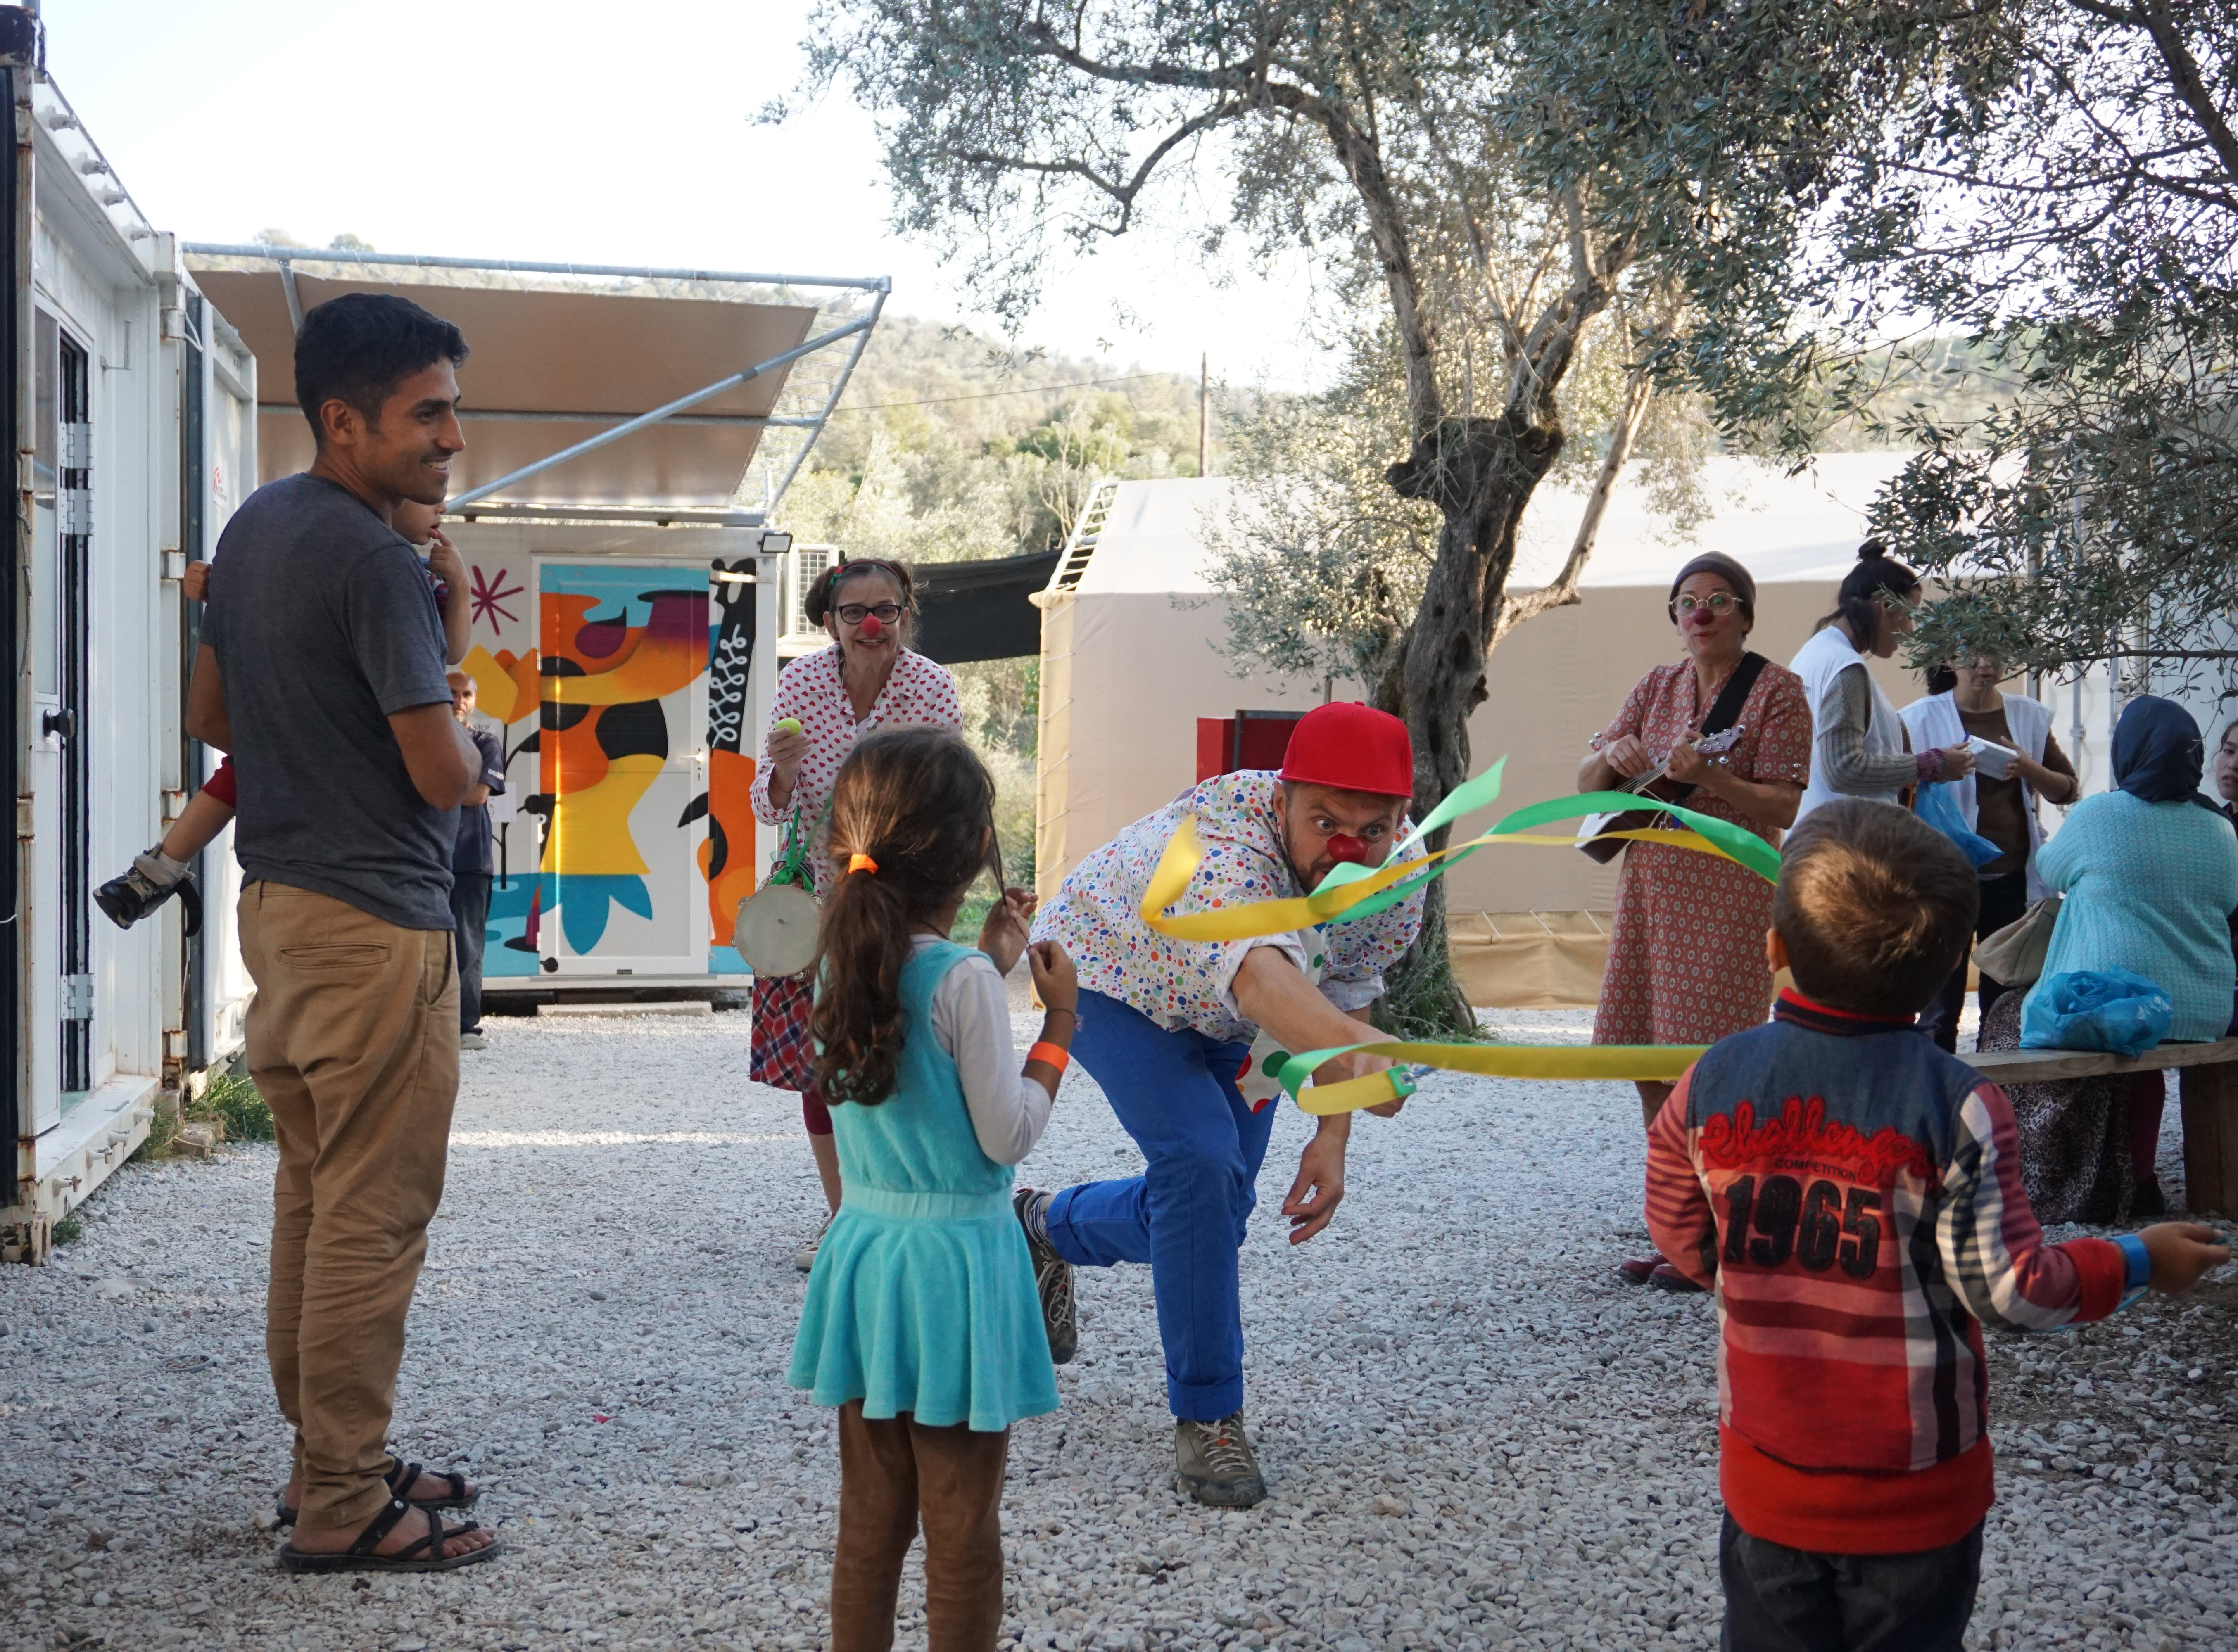 RED NOSES clowns interact with children in the MORIA refugee camp by performing tricks to make them smile